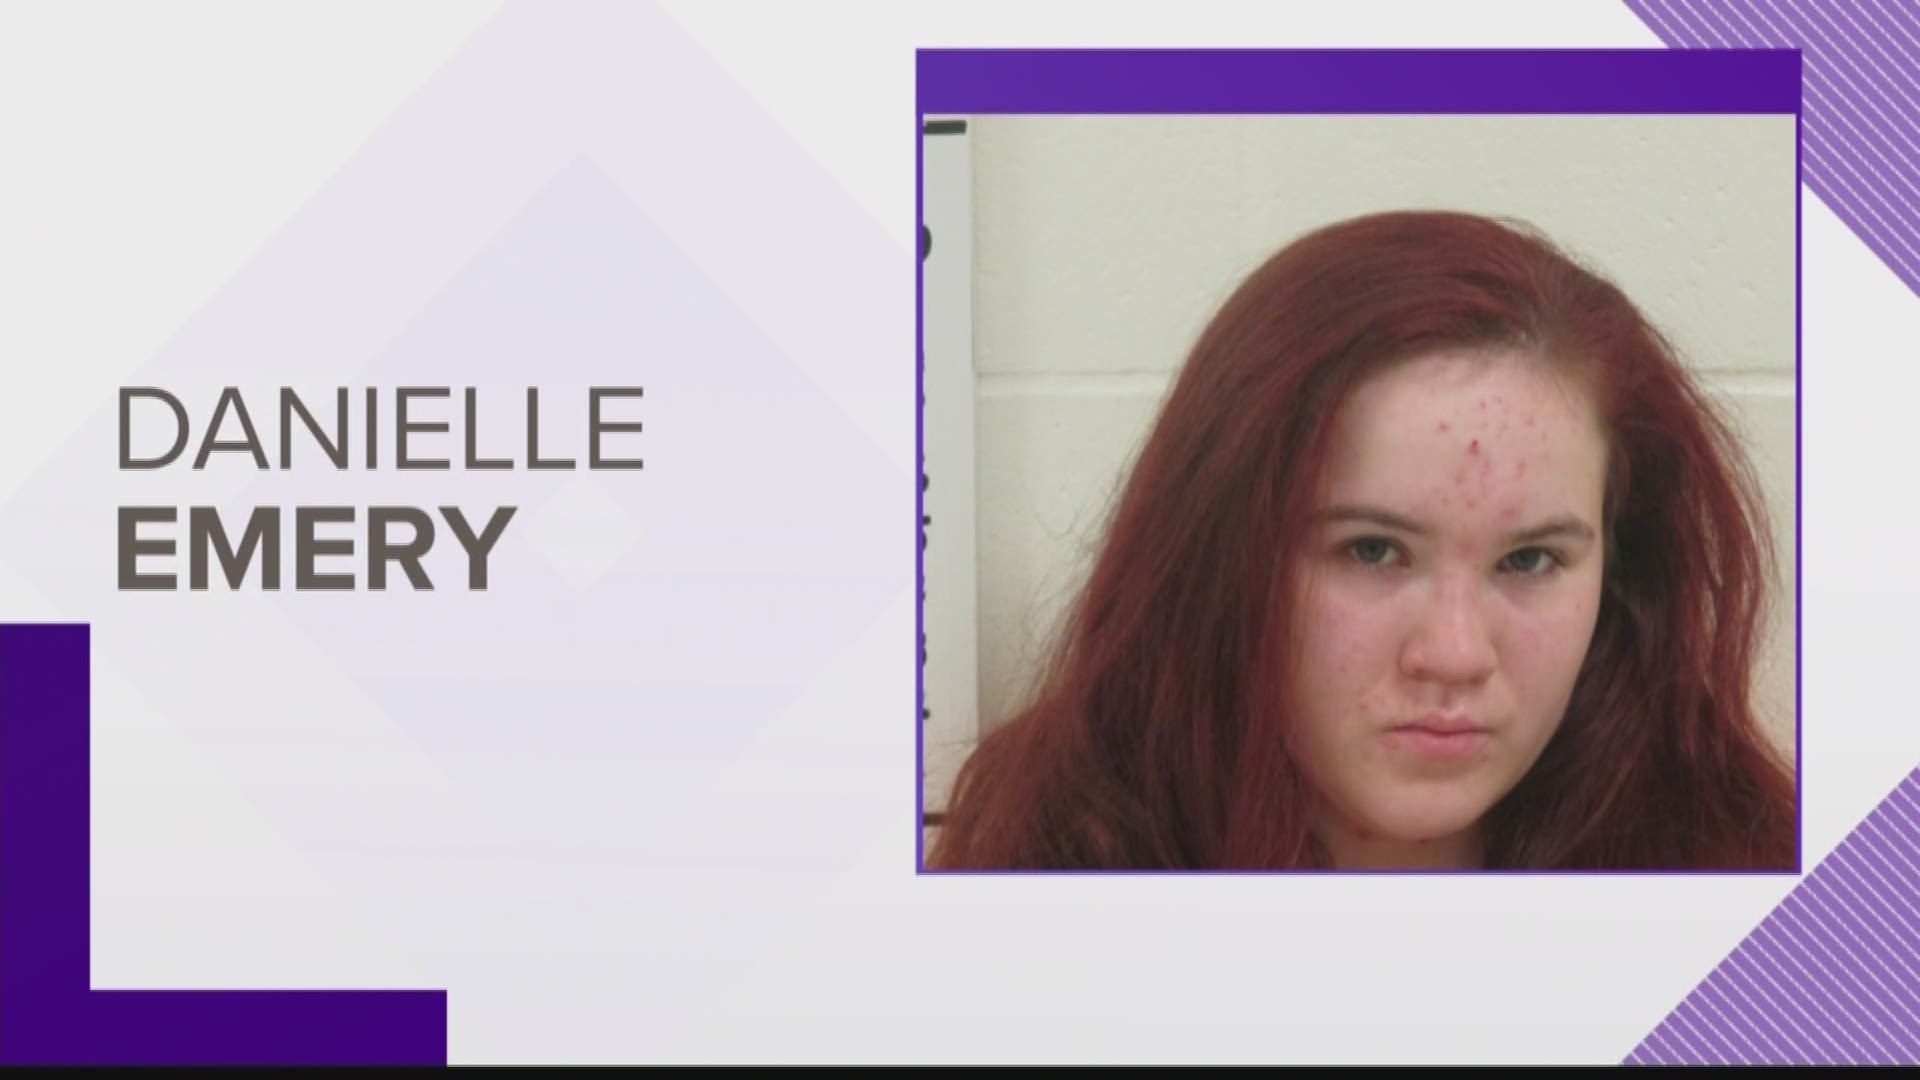 Danielle Emery was arrested after reportedly stabbing a pregnant woman in the abdomen Sunday in Parsonsfield.